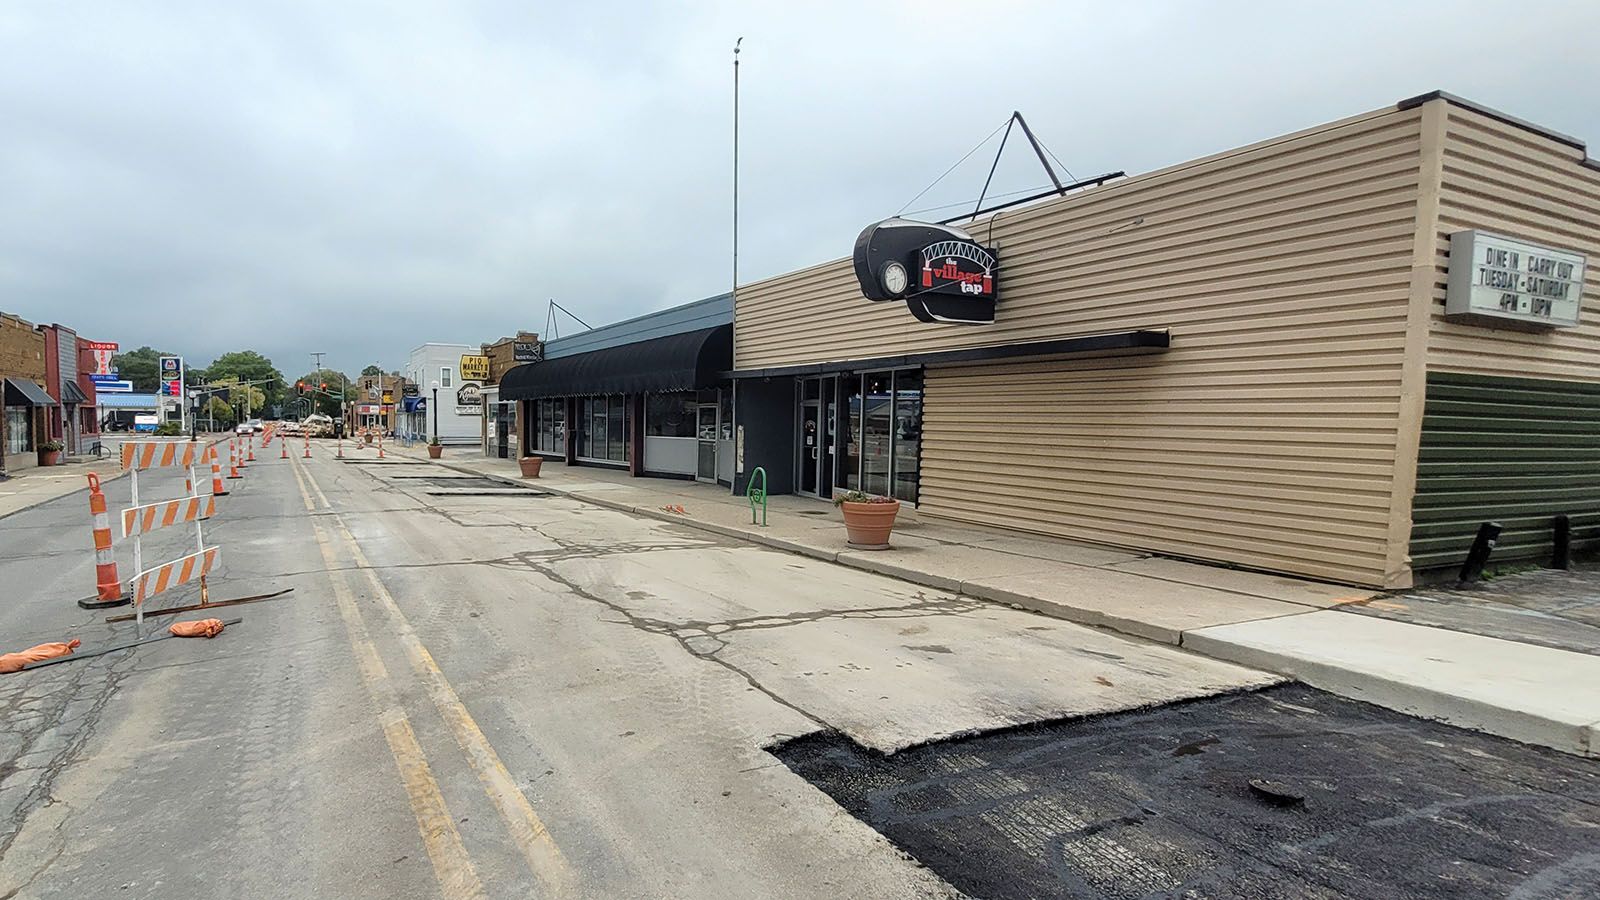 Construction on East State Boulevard has been a headache for drivers and business owners.